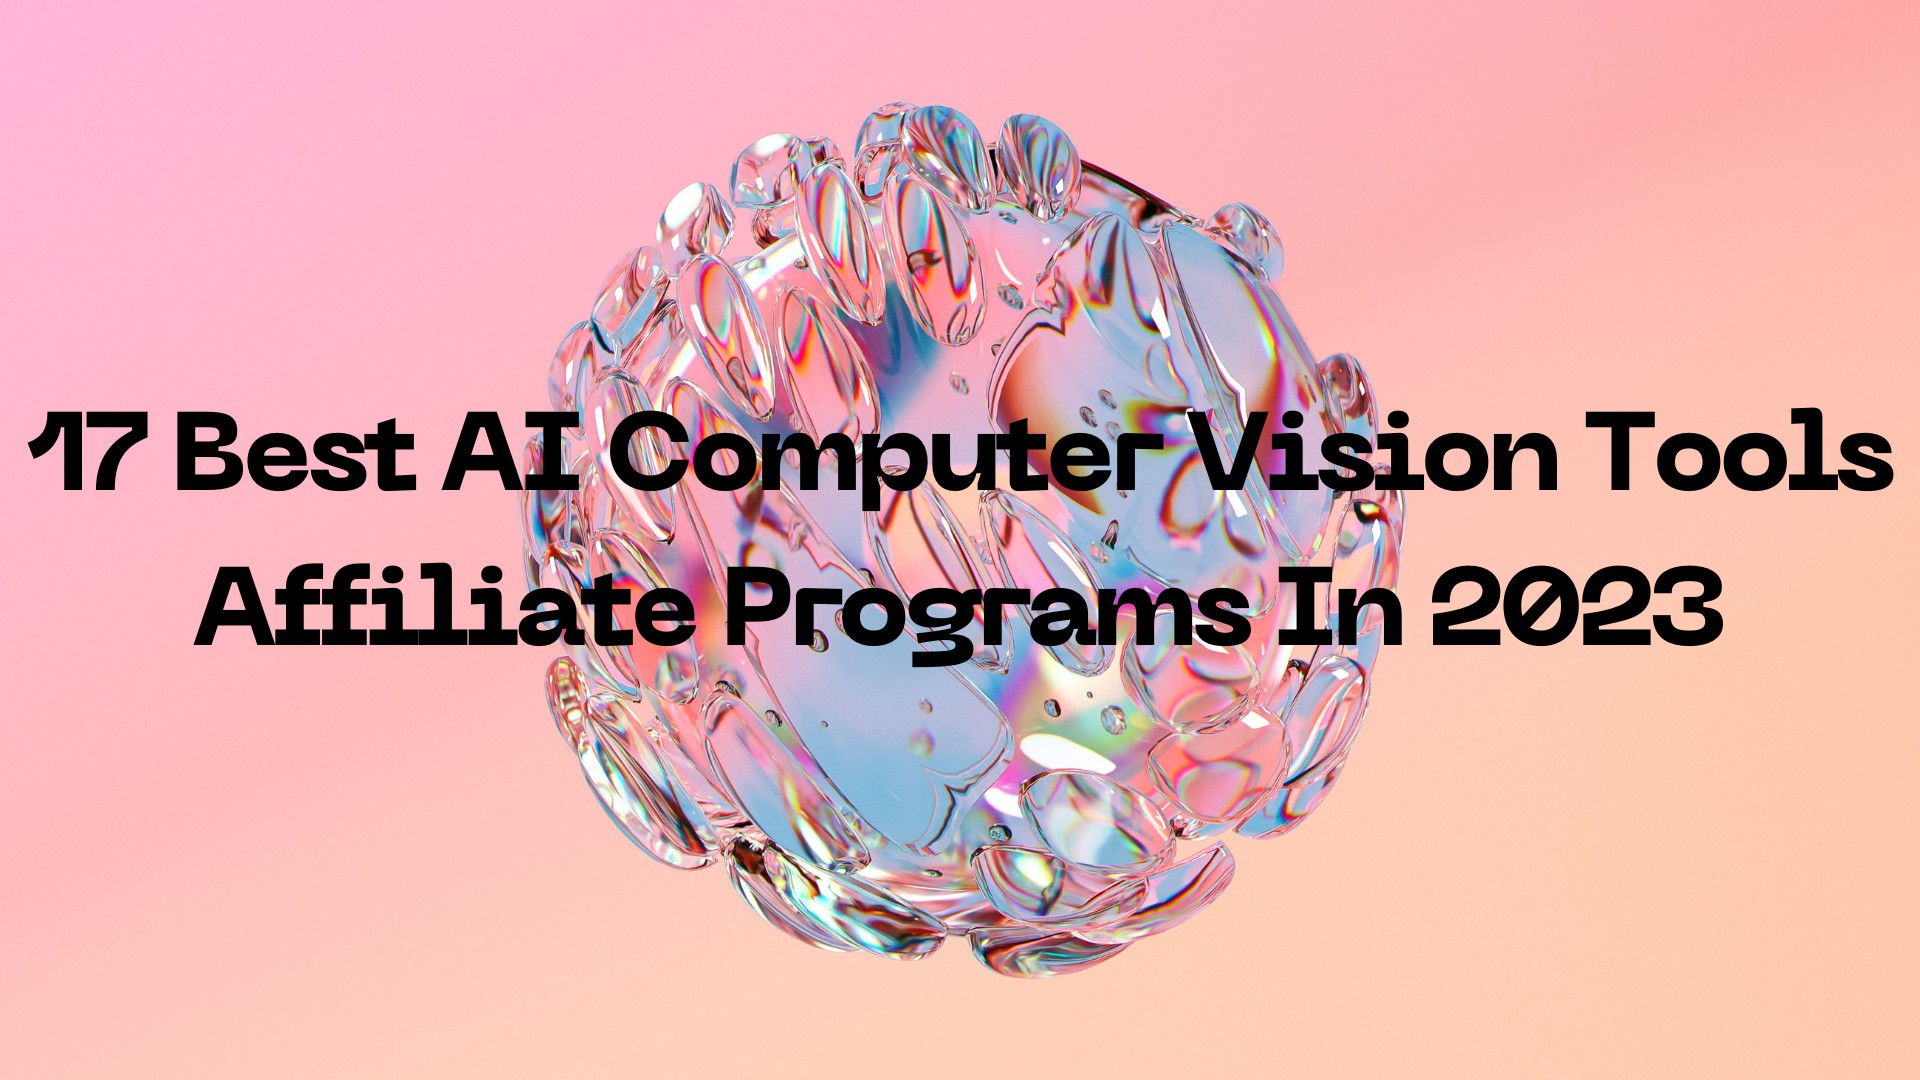 17 Best AI Computer Vision Tools Affiliate Programs In 2023